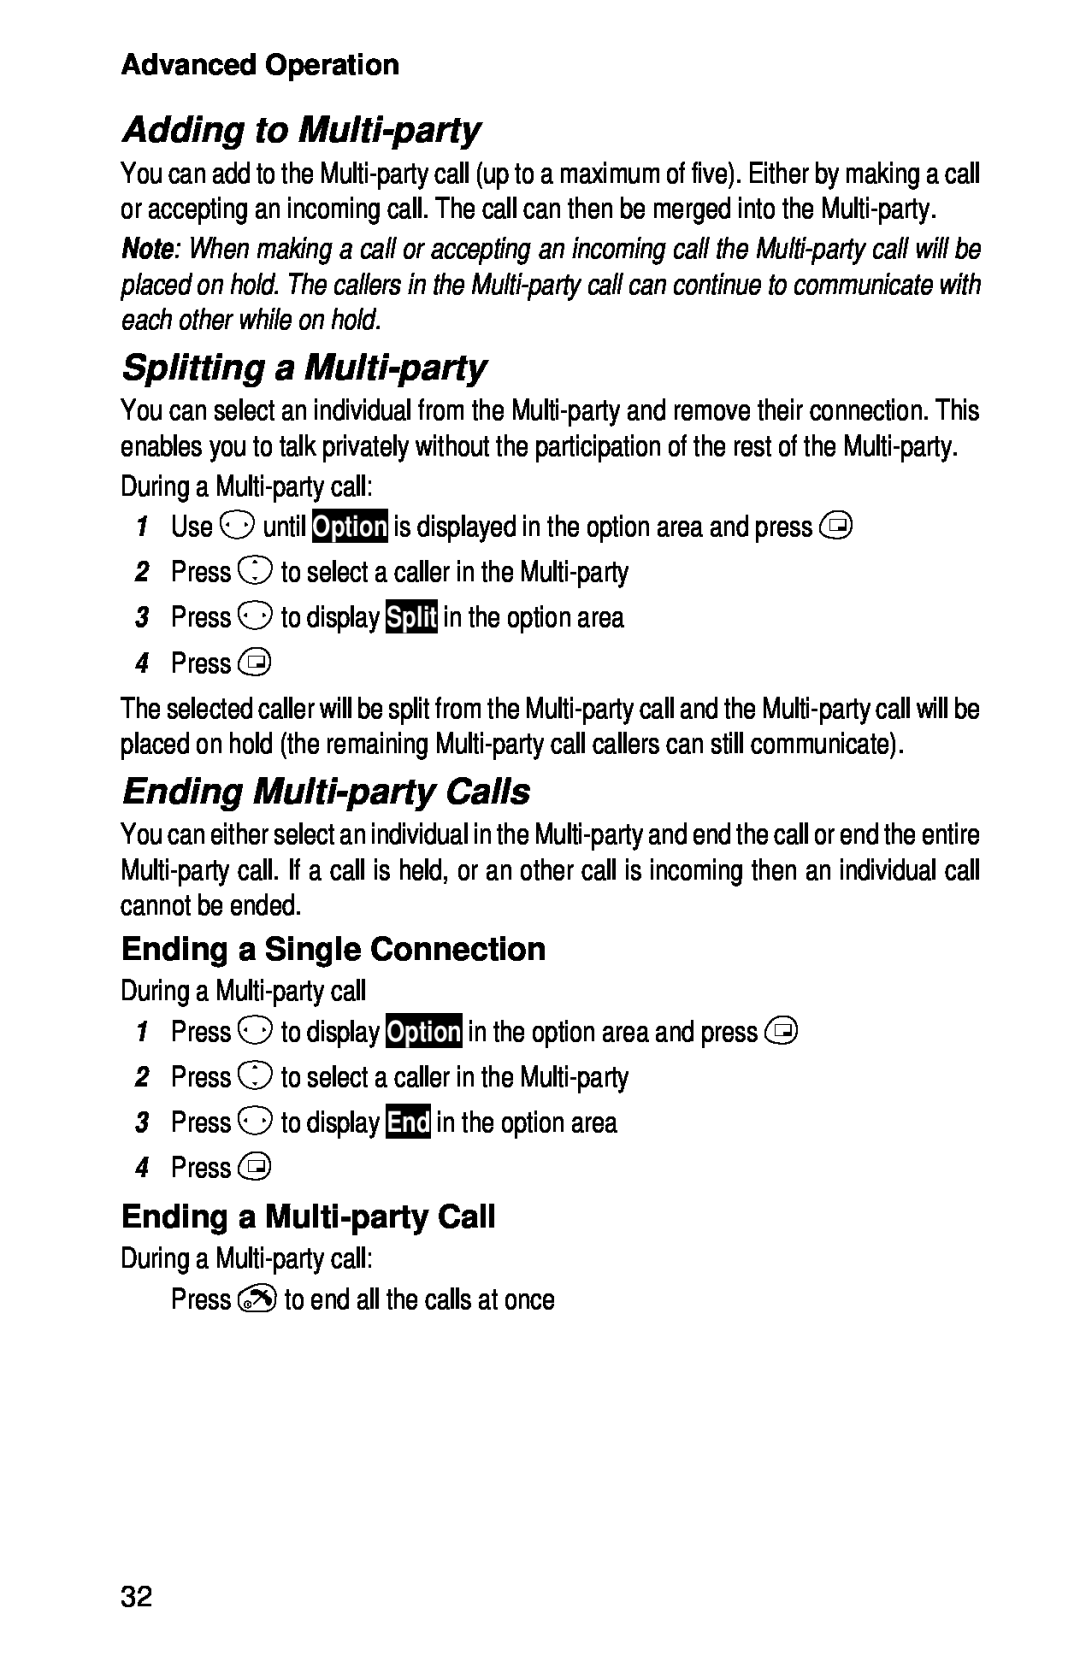 Panasonic EB-GD52 Adding to Multi-party, Splitting a Multi-party, Ending Multi-party Calls, Ending a Single Connection 